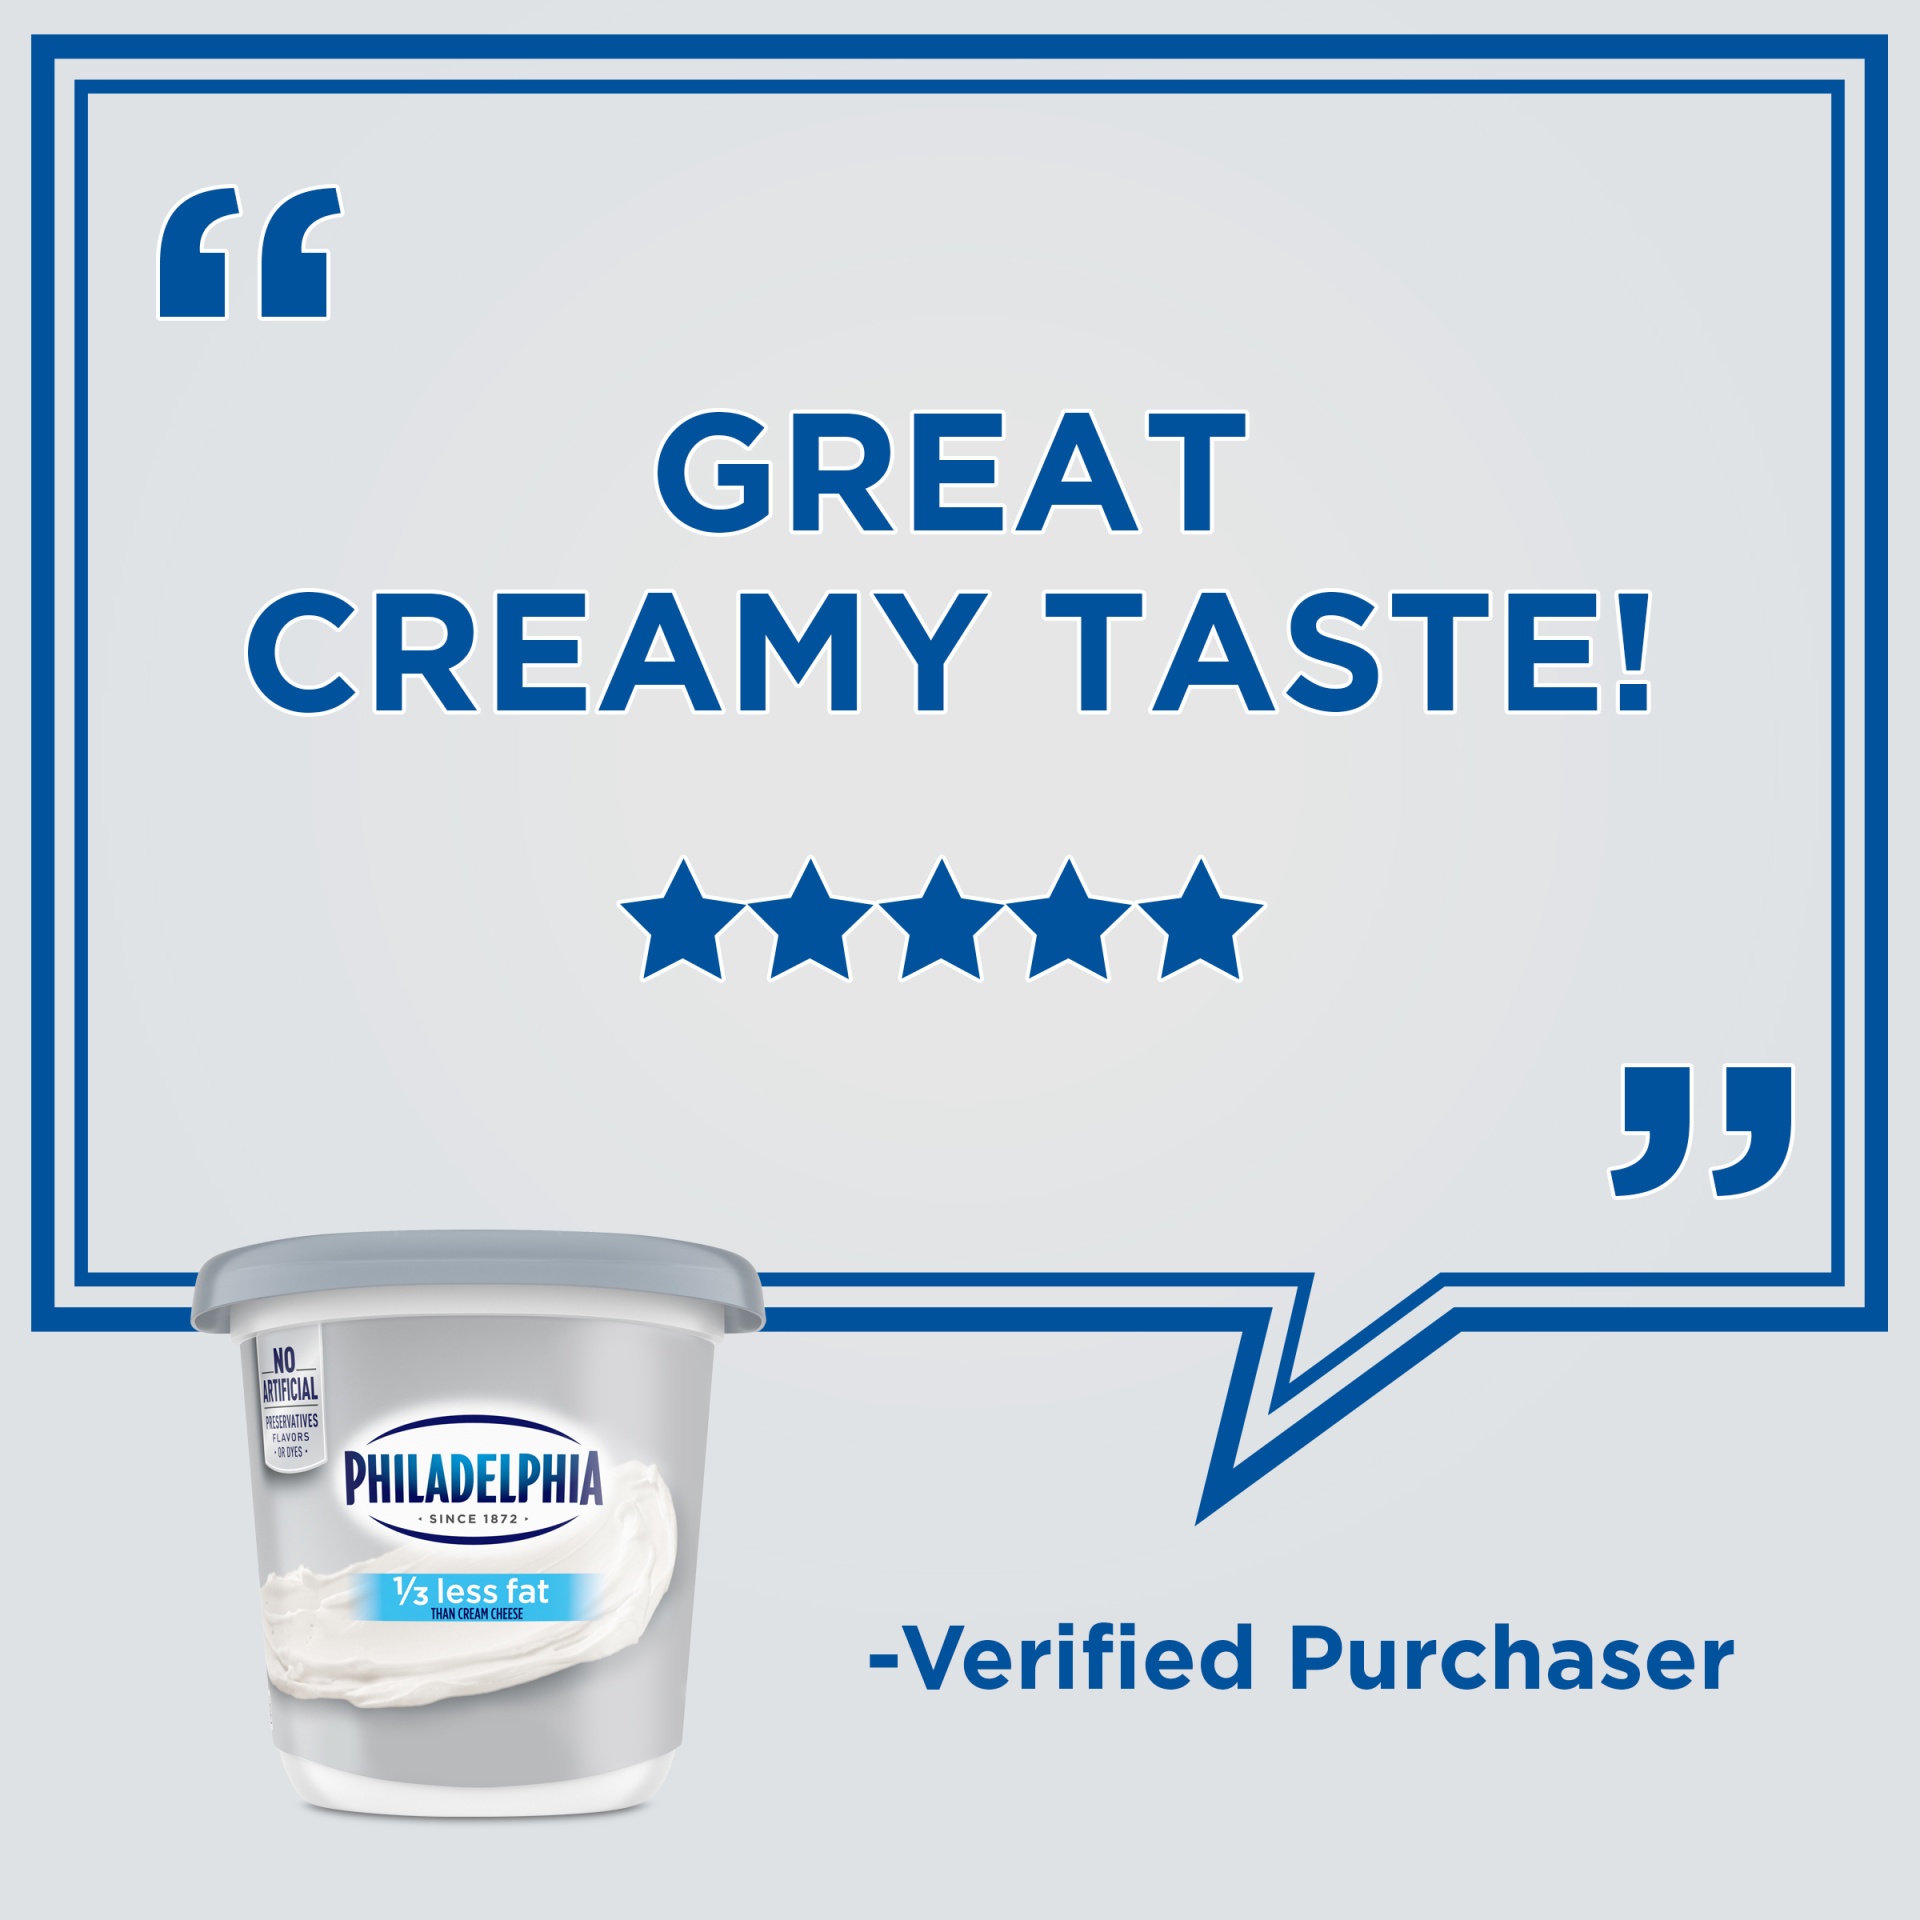 slide 8 of 13, Philadelphia Reduced Fat Cream Cheese Spread with 1/3 Less Fat Tub, 16 oz